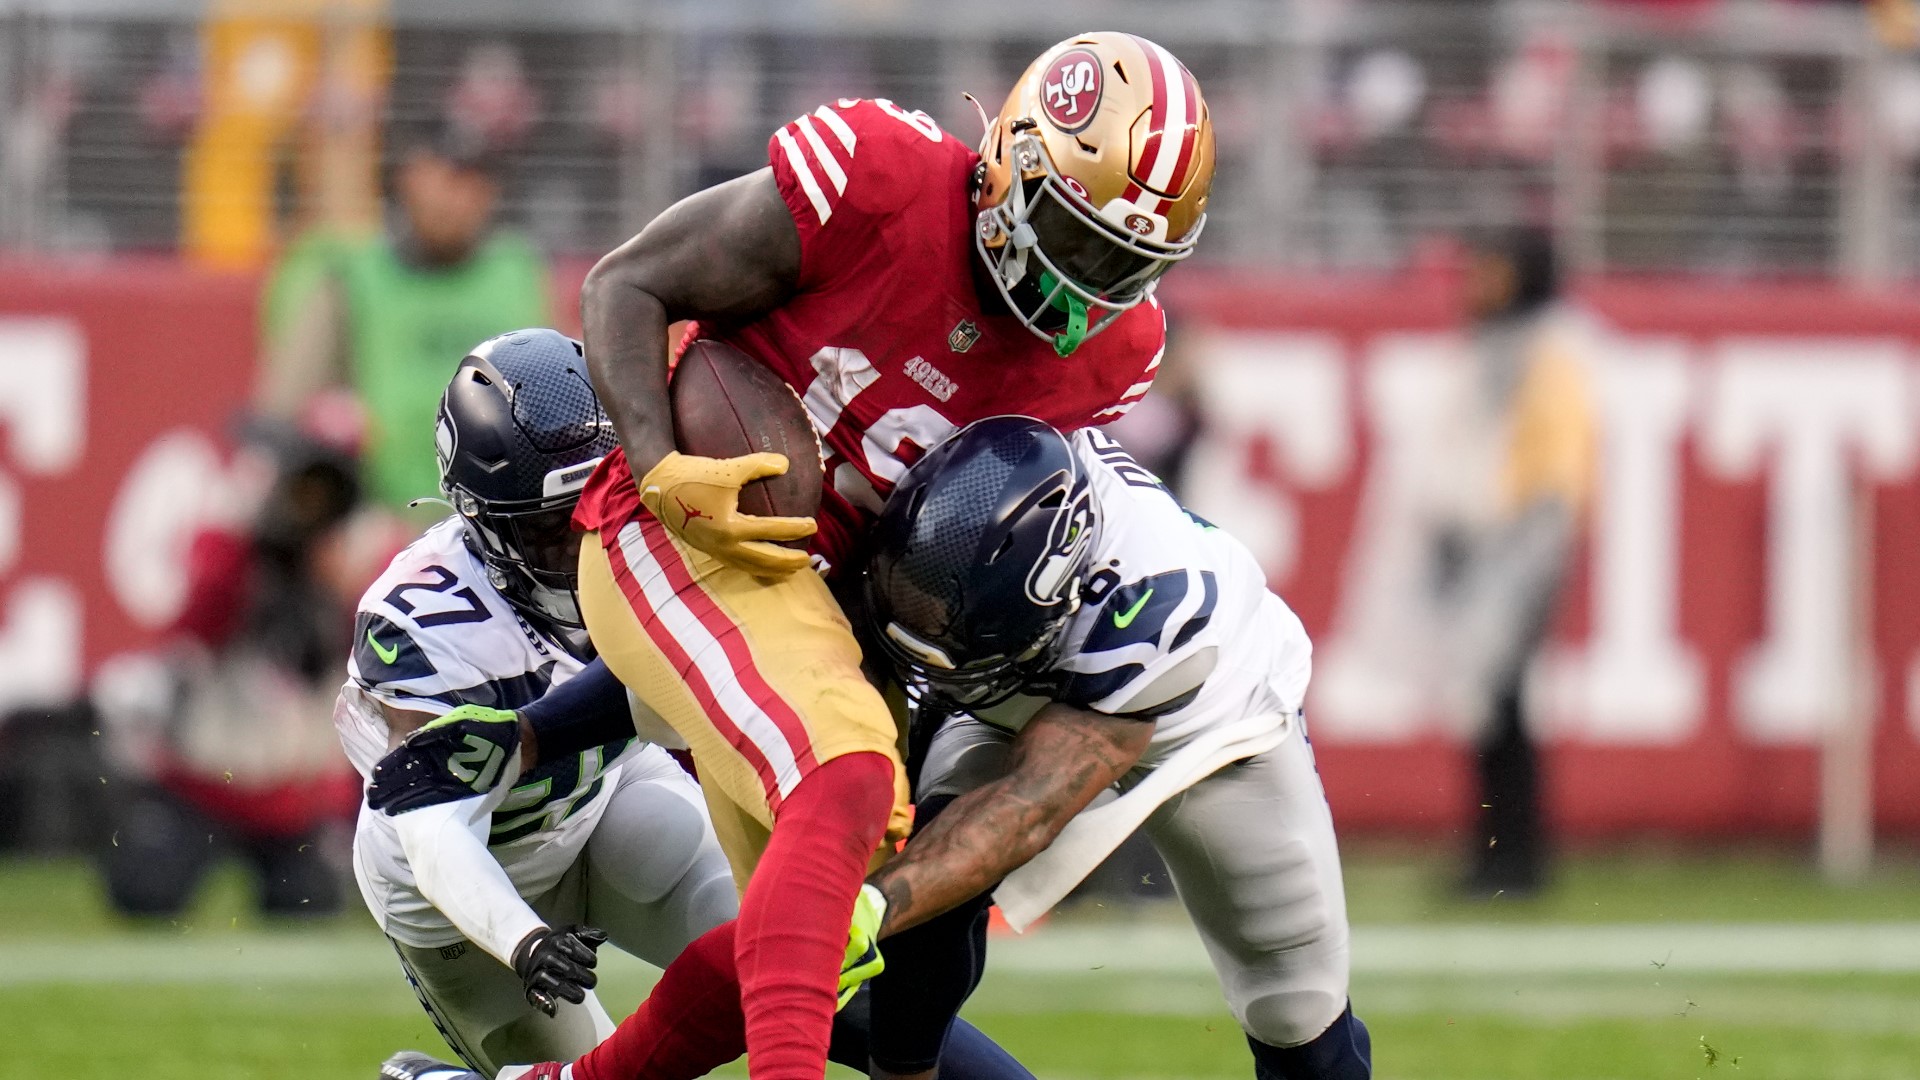 KING 5 Seahawks analyst Steve Raible breaks down what went wrong in the Wild Card loss to the 49ers.